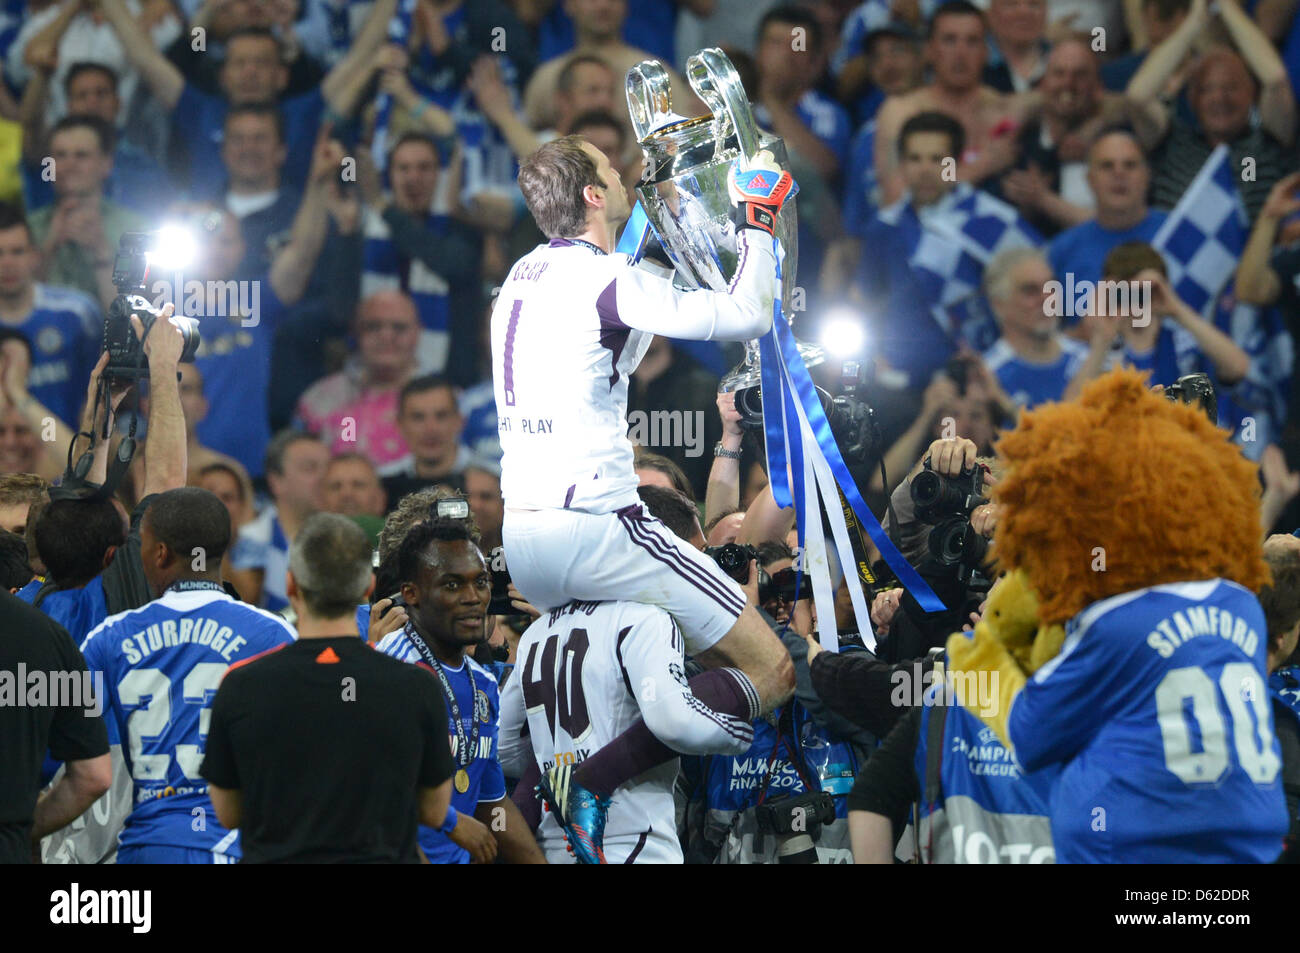 Chelsea's goalkeeper Petr Cech lifts the trophy after winning the UEFA Champions League soccer final between FC Bayern Munich and FC Chelsea at Fußball Arena München in Munich, Germany, 19 May 2012. Photo: Marcus Brandt dpa/lby  +++(c) dpa - Bildfunk+++ Stock Photo